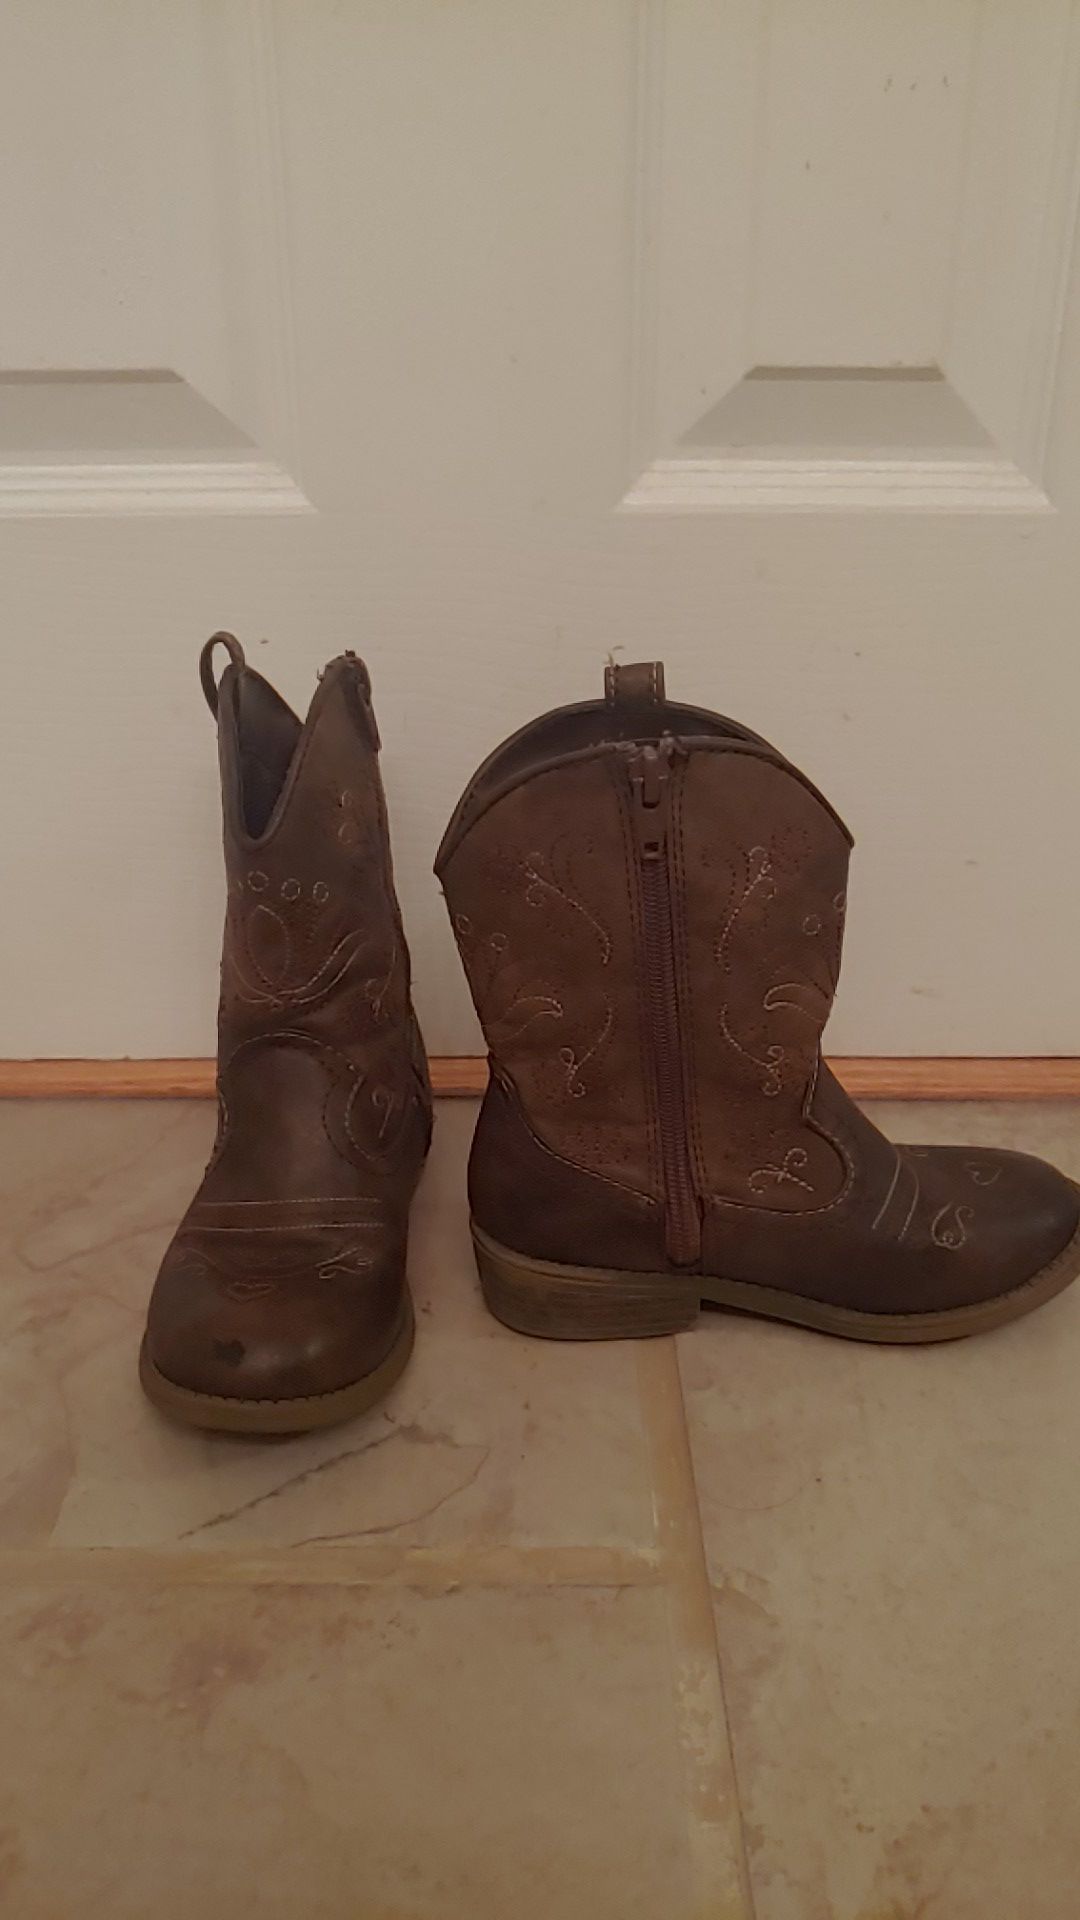 Toddler Girl size 11 Classic Brown Cowboy Boot